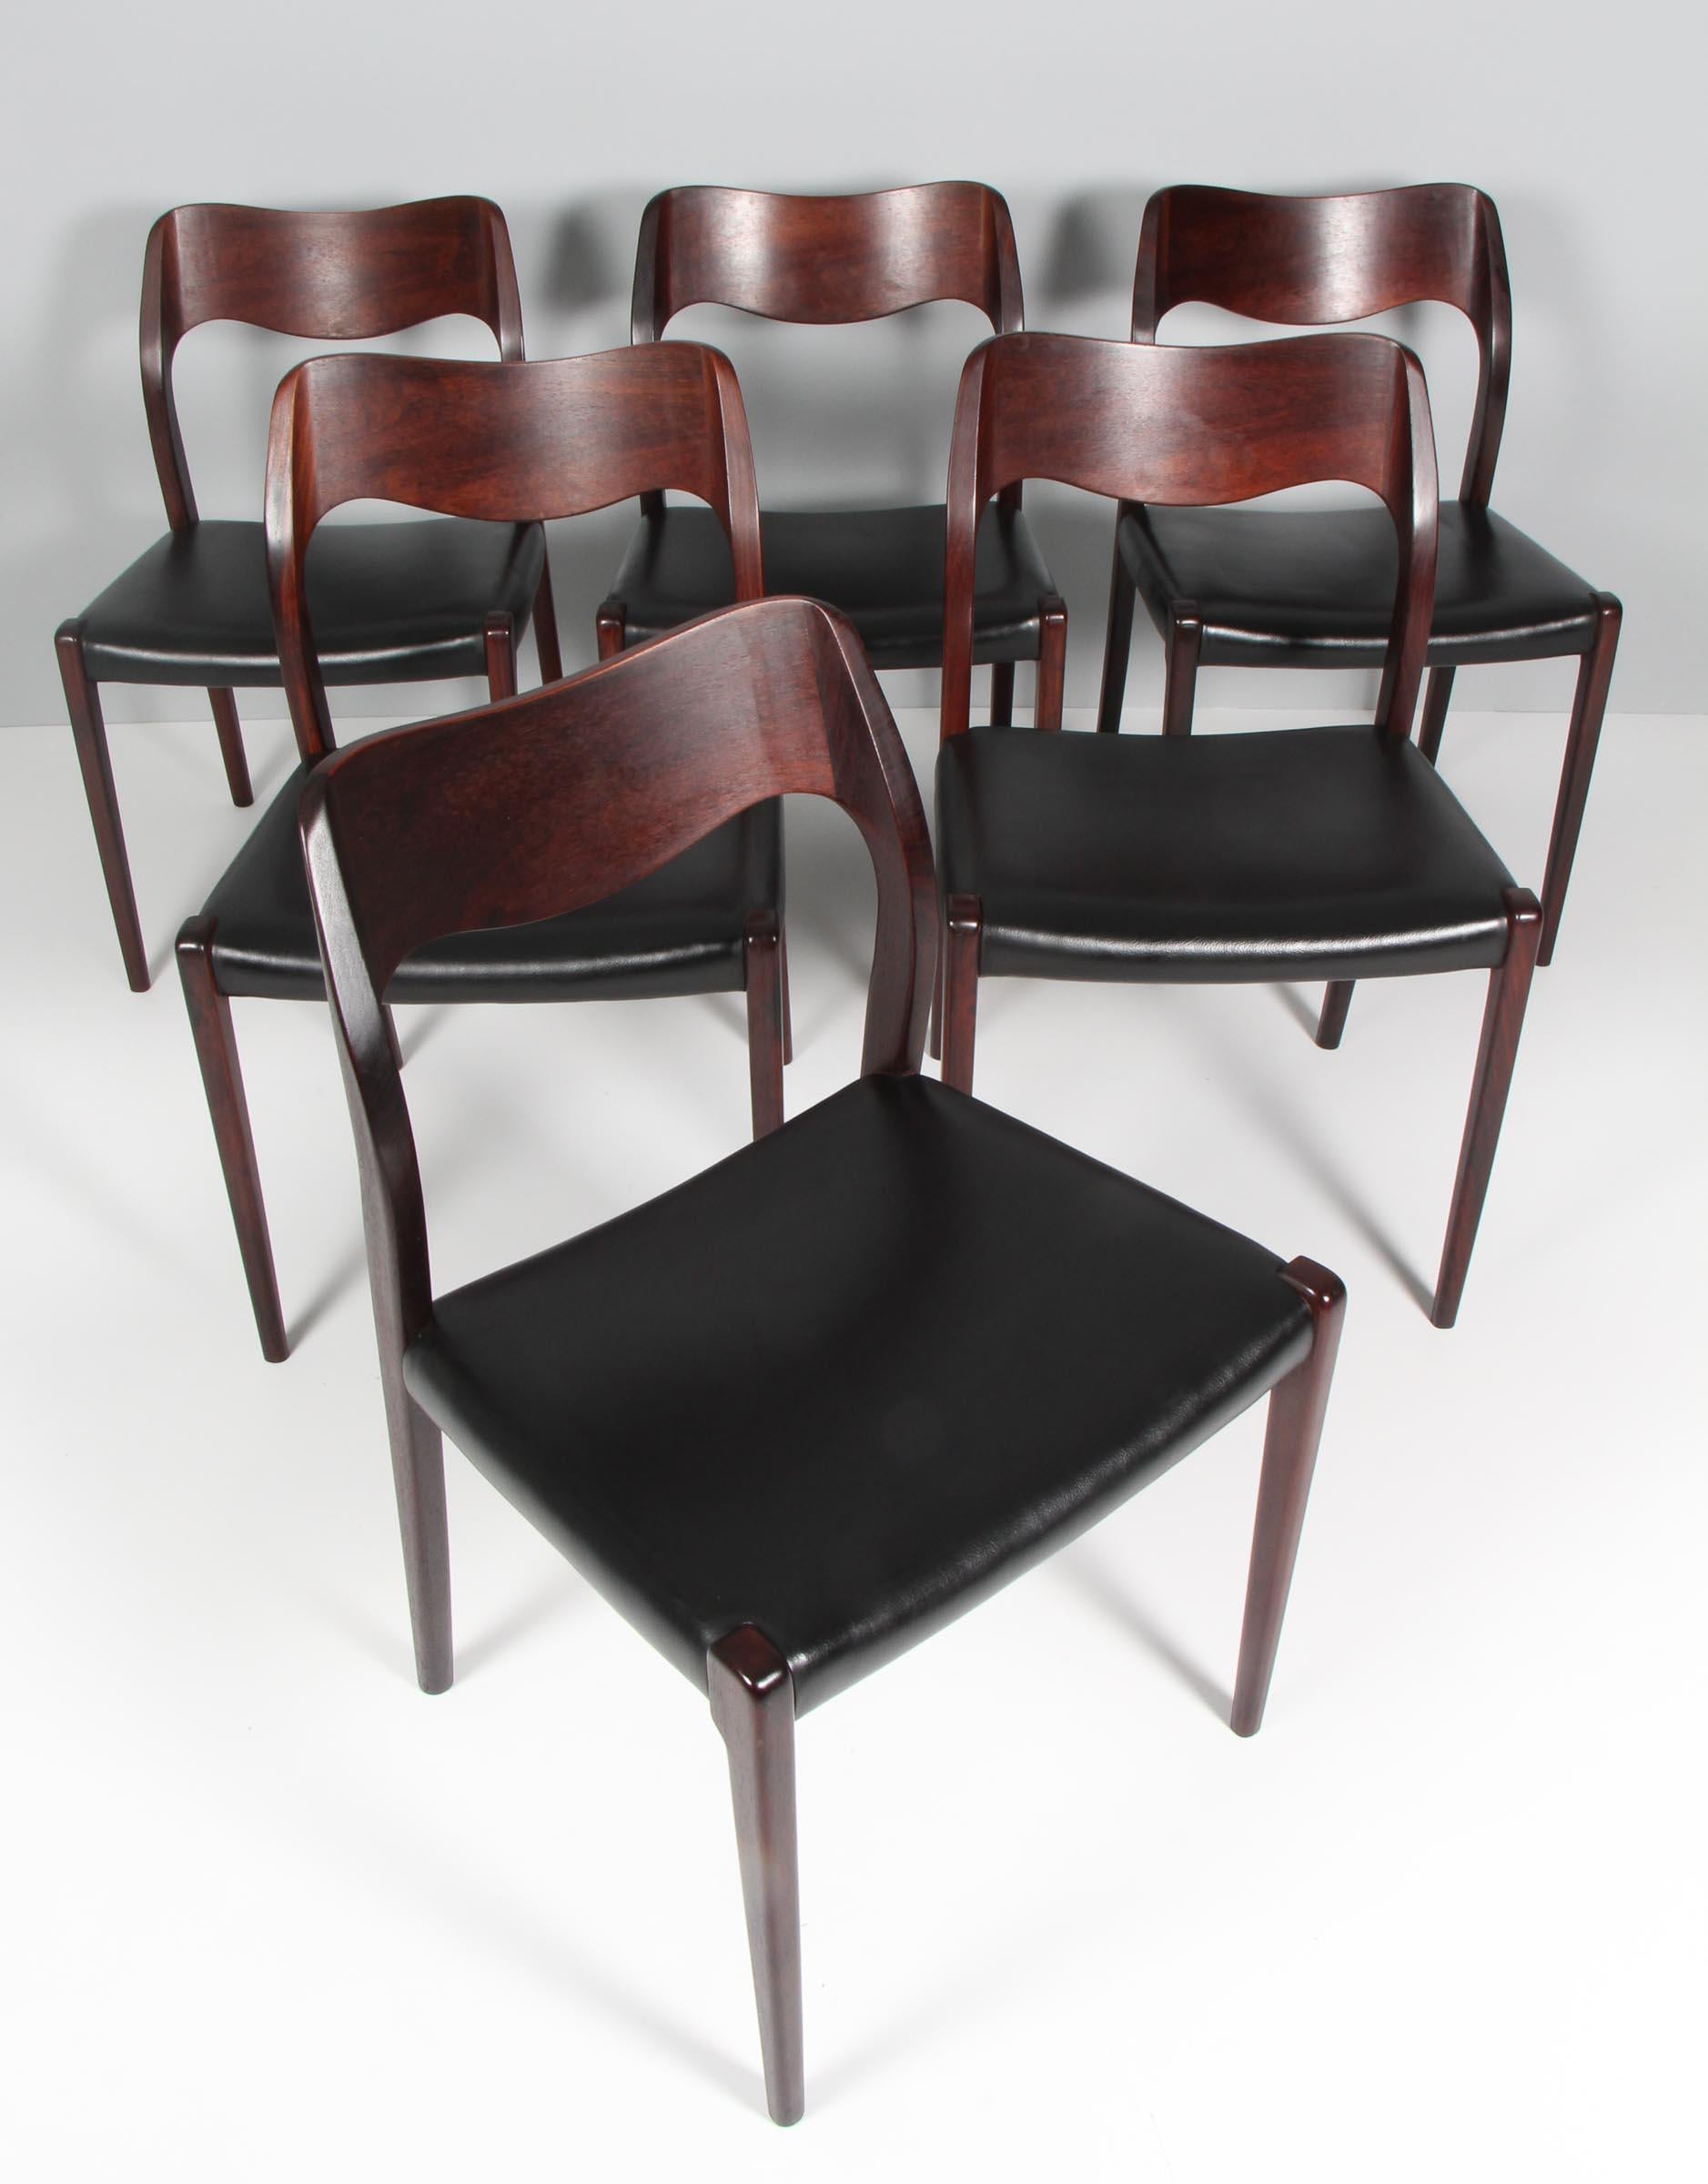 N. O. Møller set of six dining chairs in rosewood.

Seat original upholstered with black leather.

Model 71, made by J. L. Møller, Denmark, 1960s.